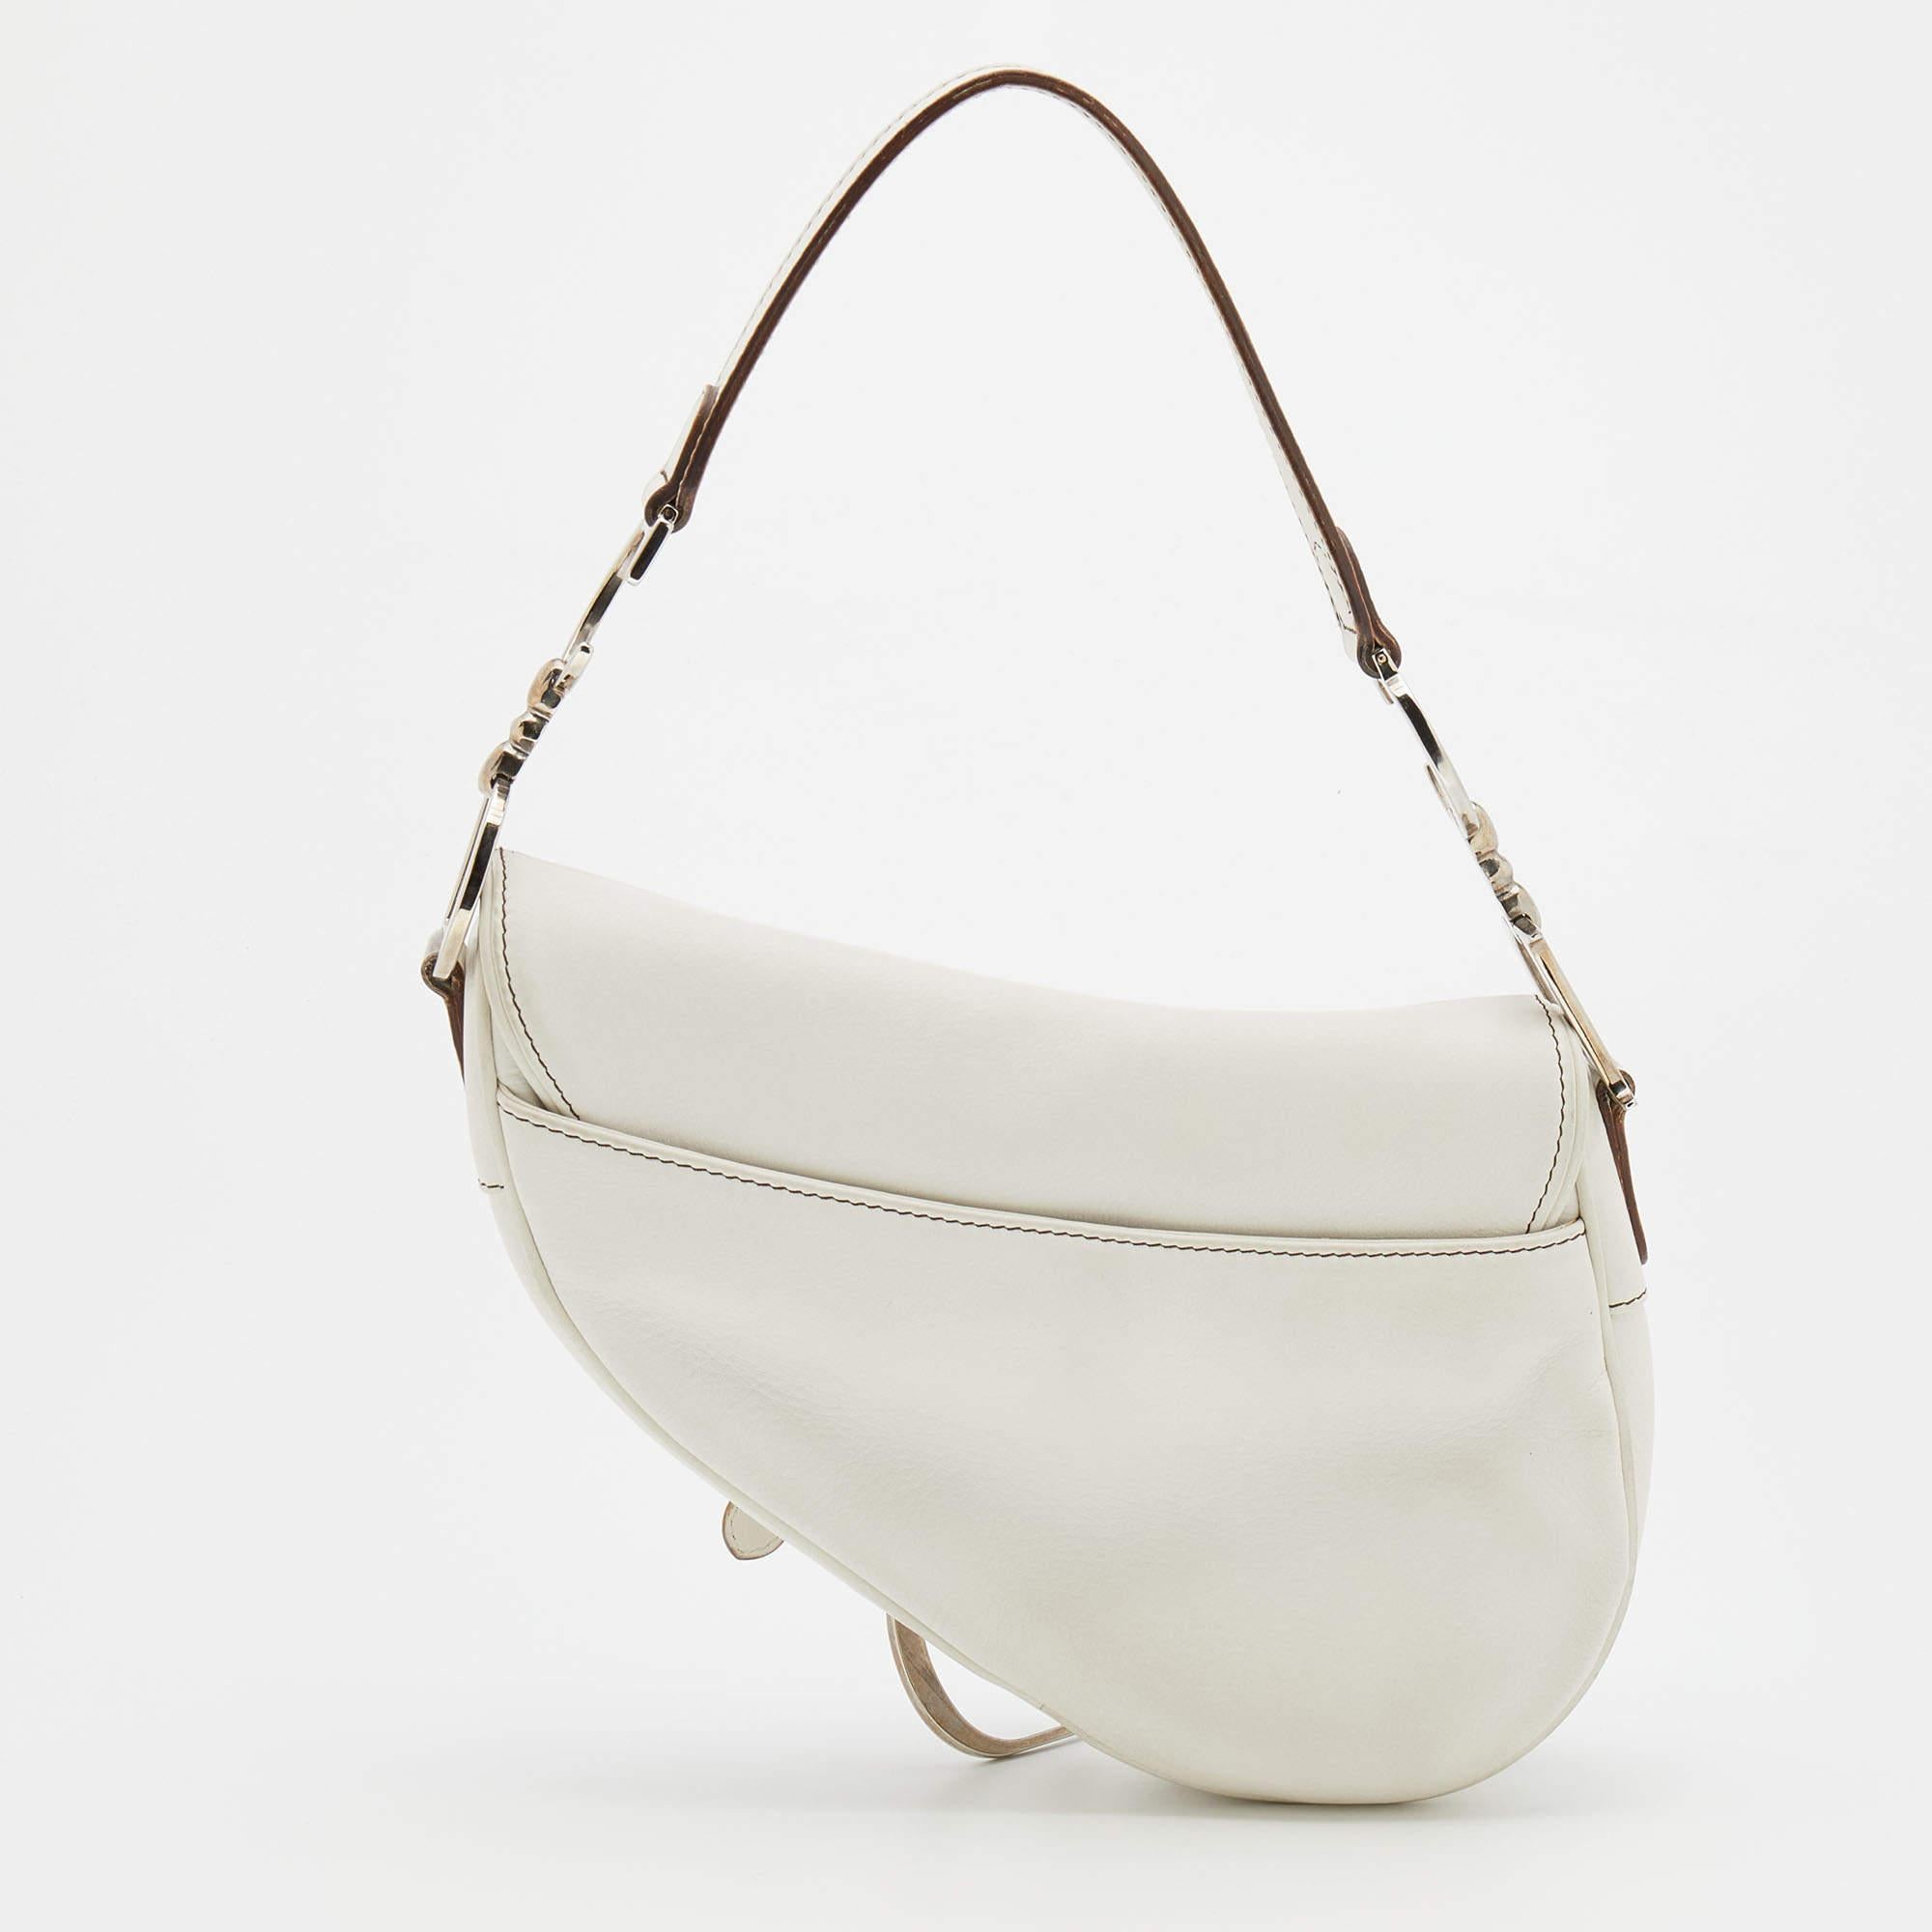 From the house of Dior, this Saddle bag is an excellent blend of elegance and style. It comes in a white hue that is perfect for making a summer statement. The bag is crafted from leather and features a shoulder strap and a well-sized interior. Make